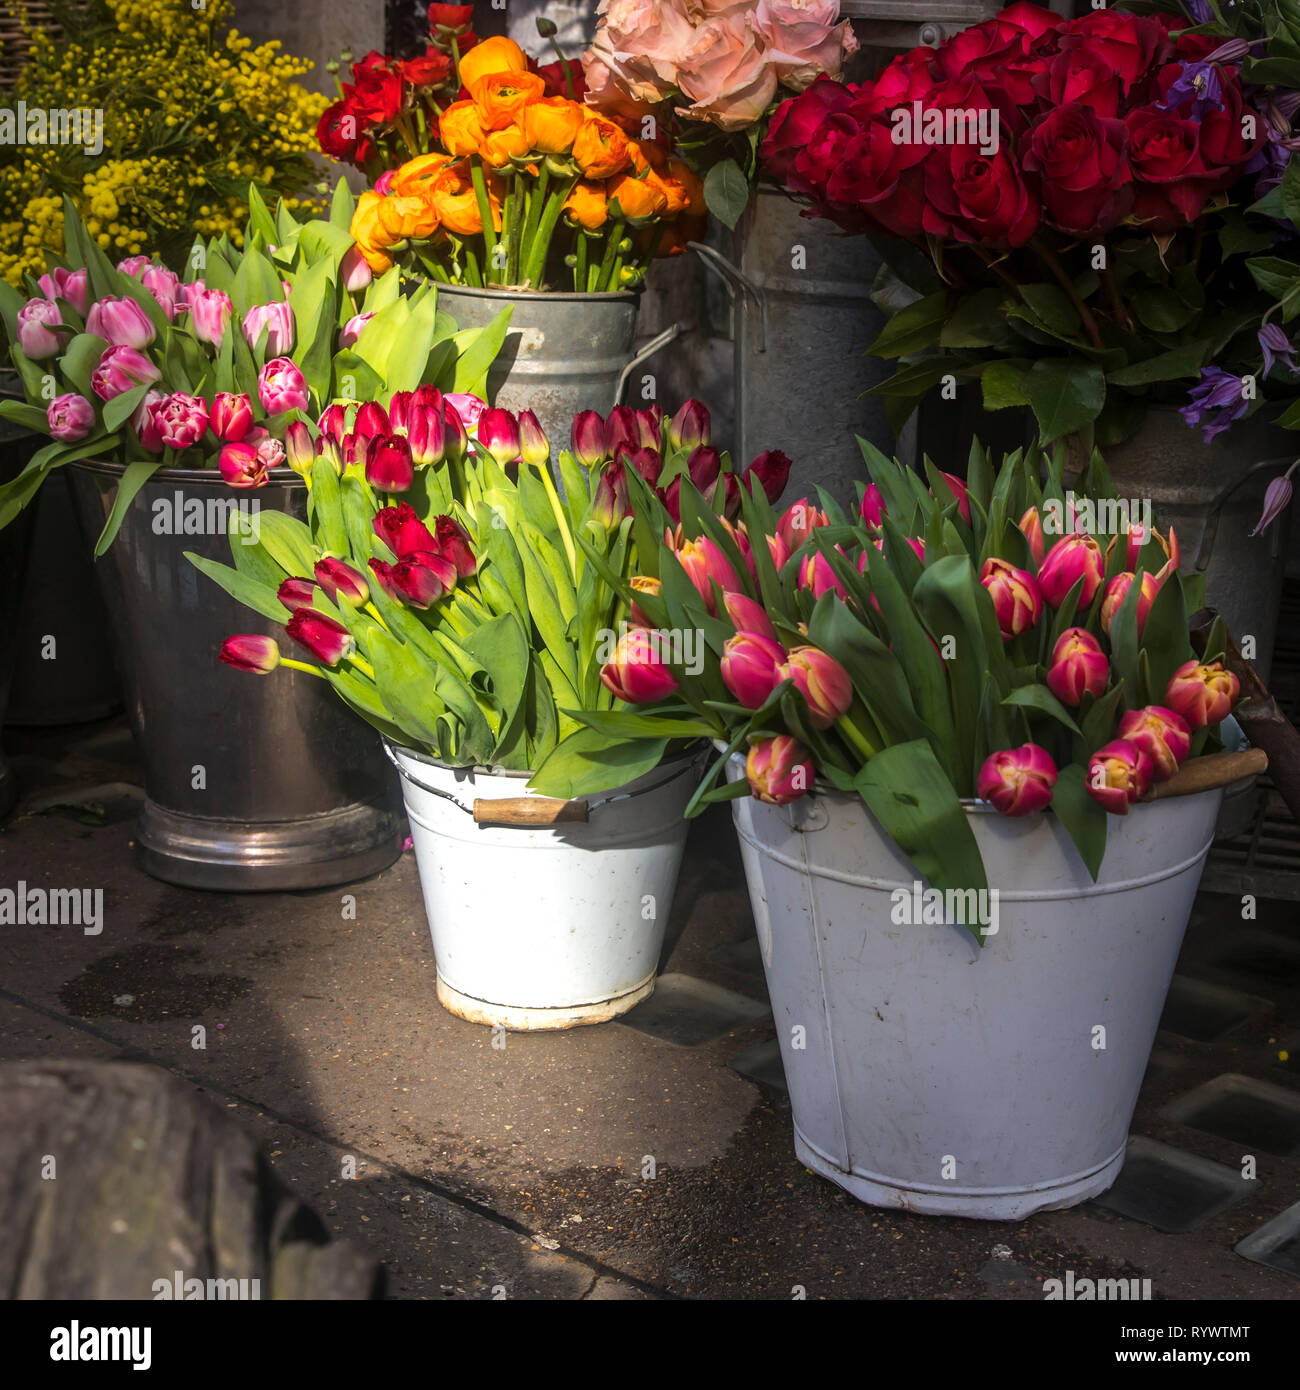 Many different spring flowers in baskets for bouquets on sale in the market Stock Photo